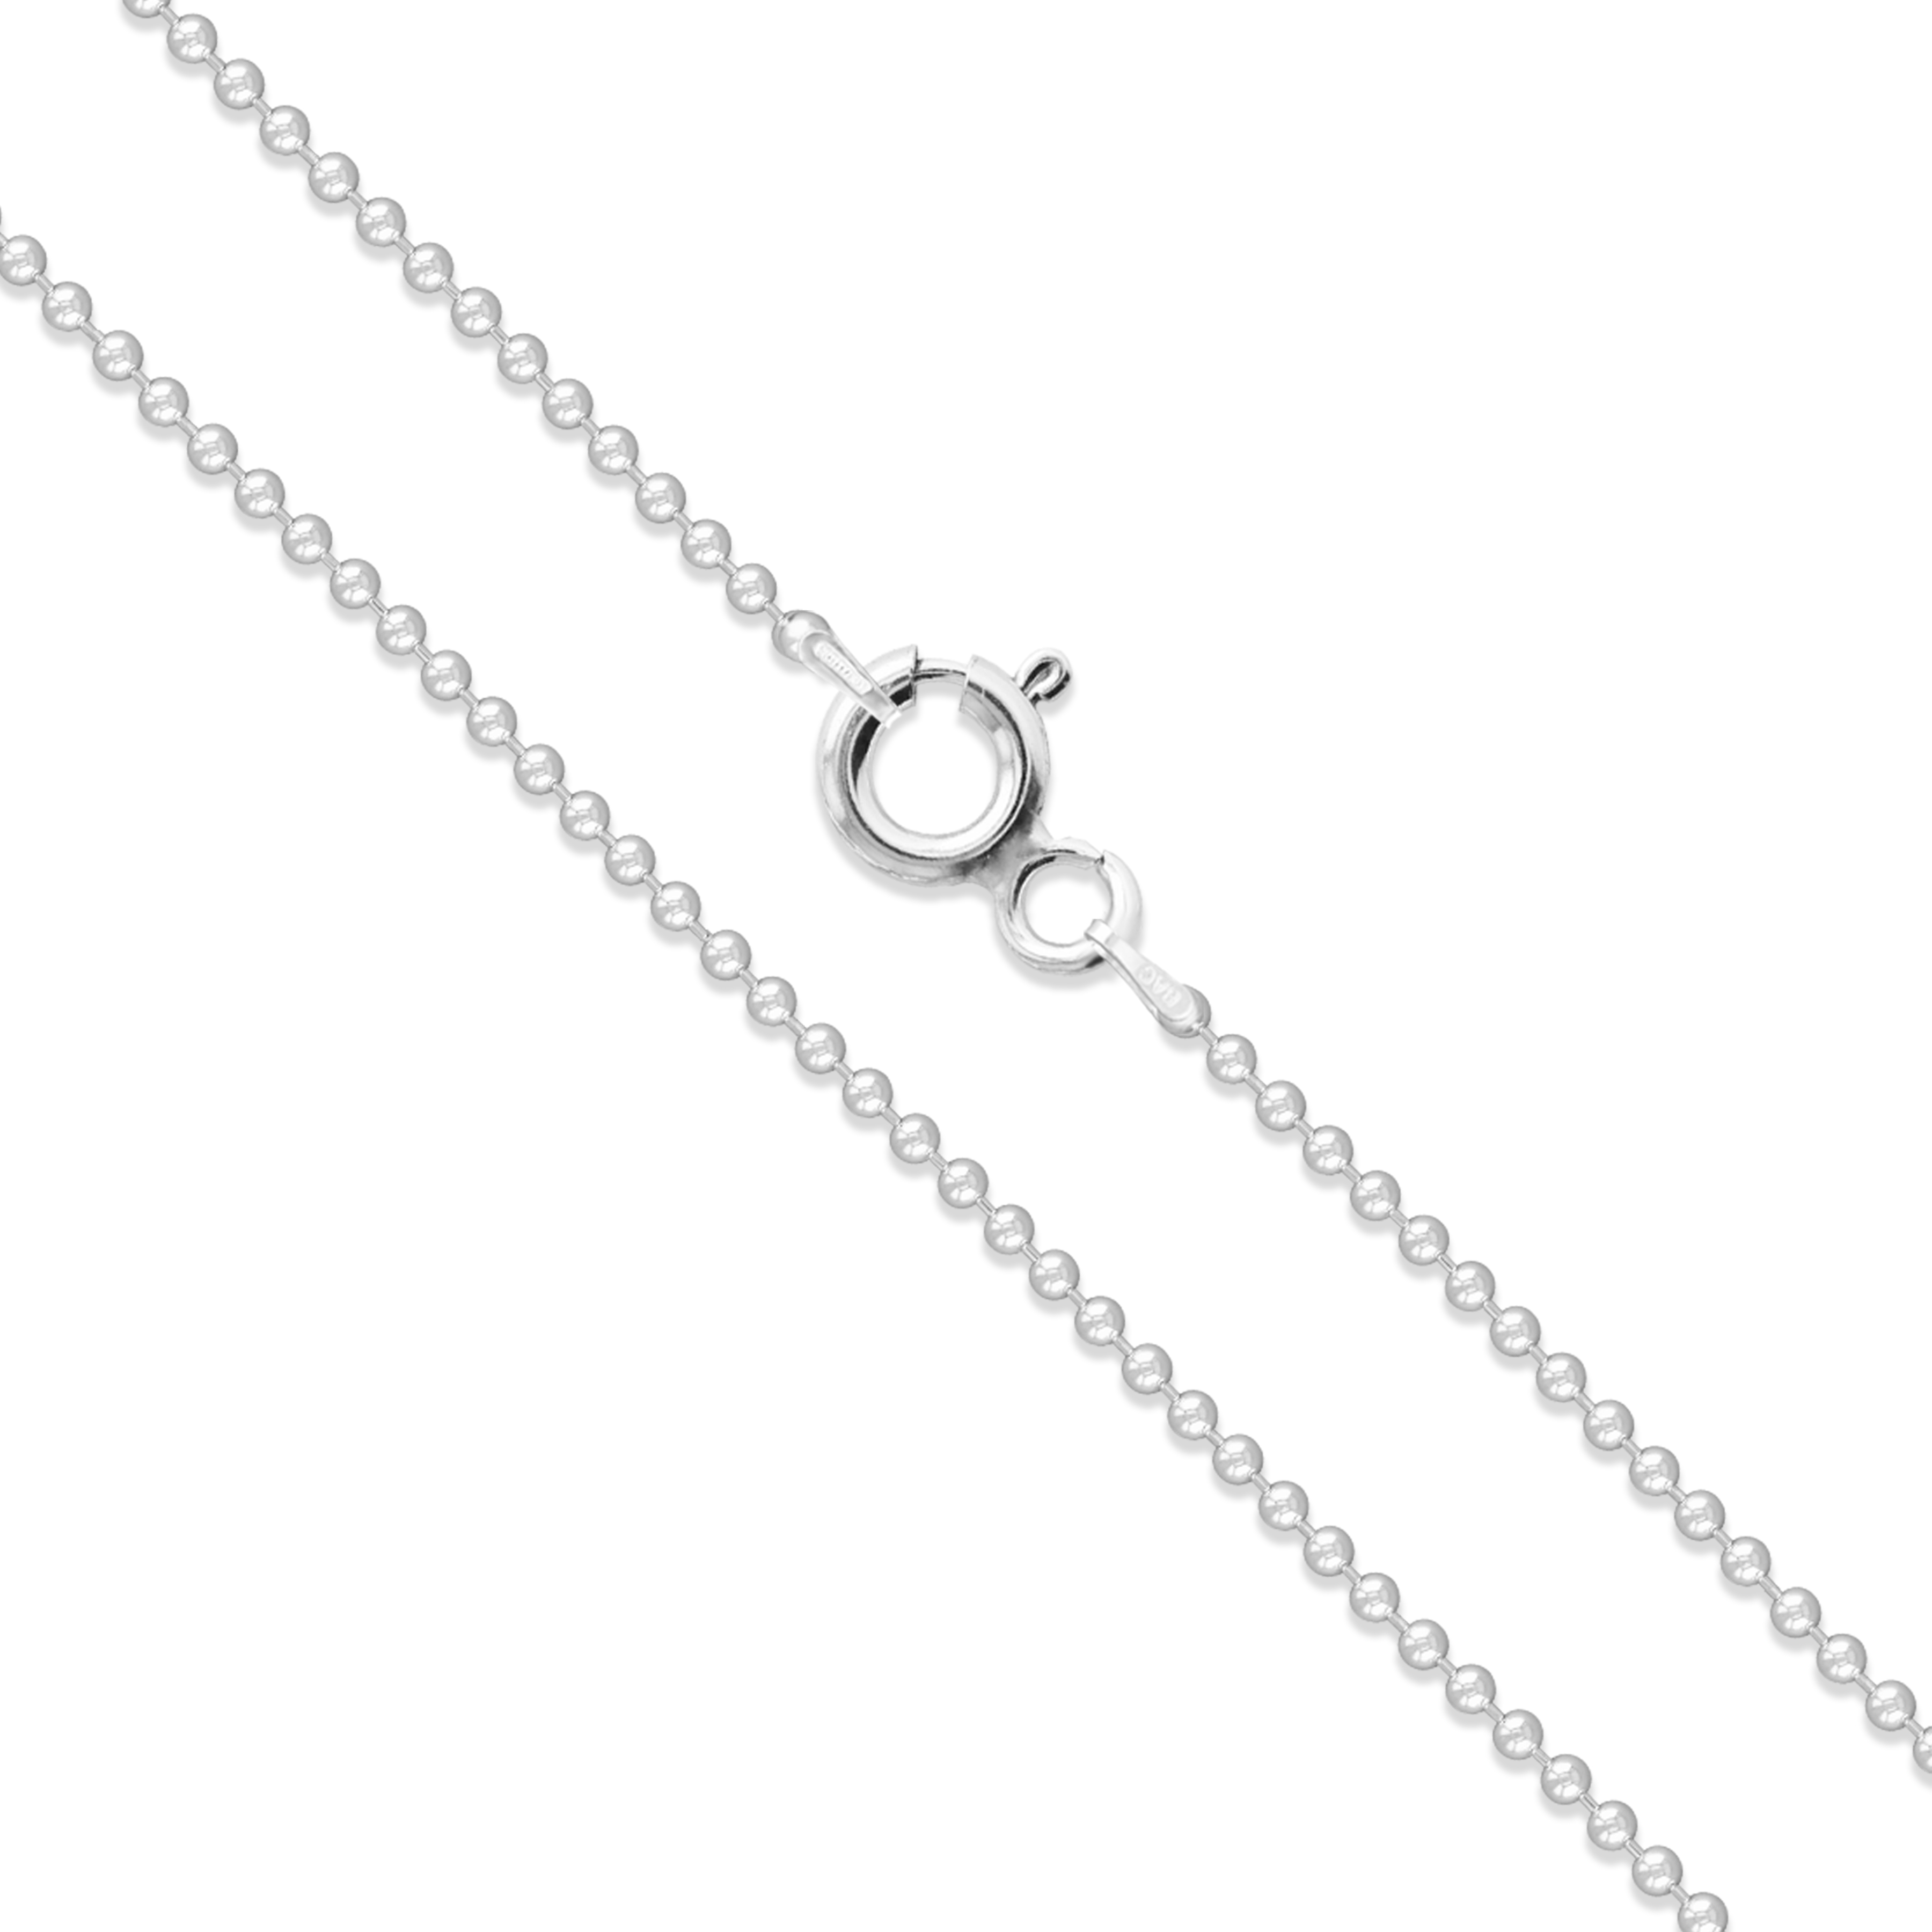 Buy Italian Ball Bead Chain Necklace 925 Sterling Silver, 30 Inch, 4 Mm,  32.21 Gr